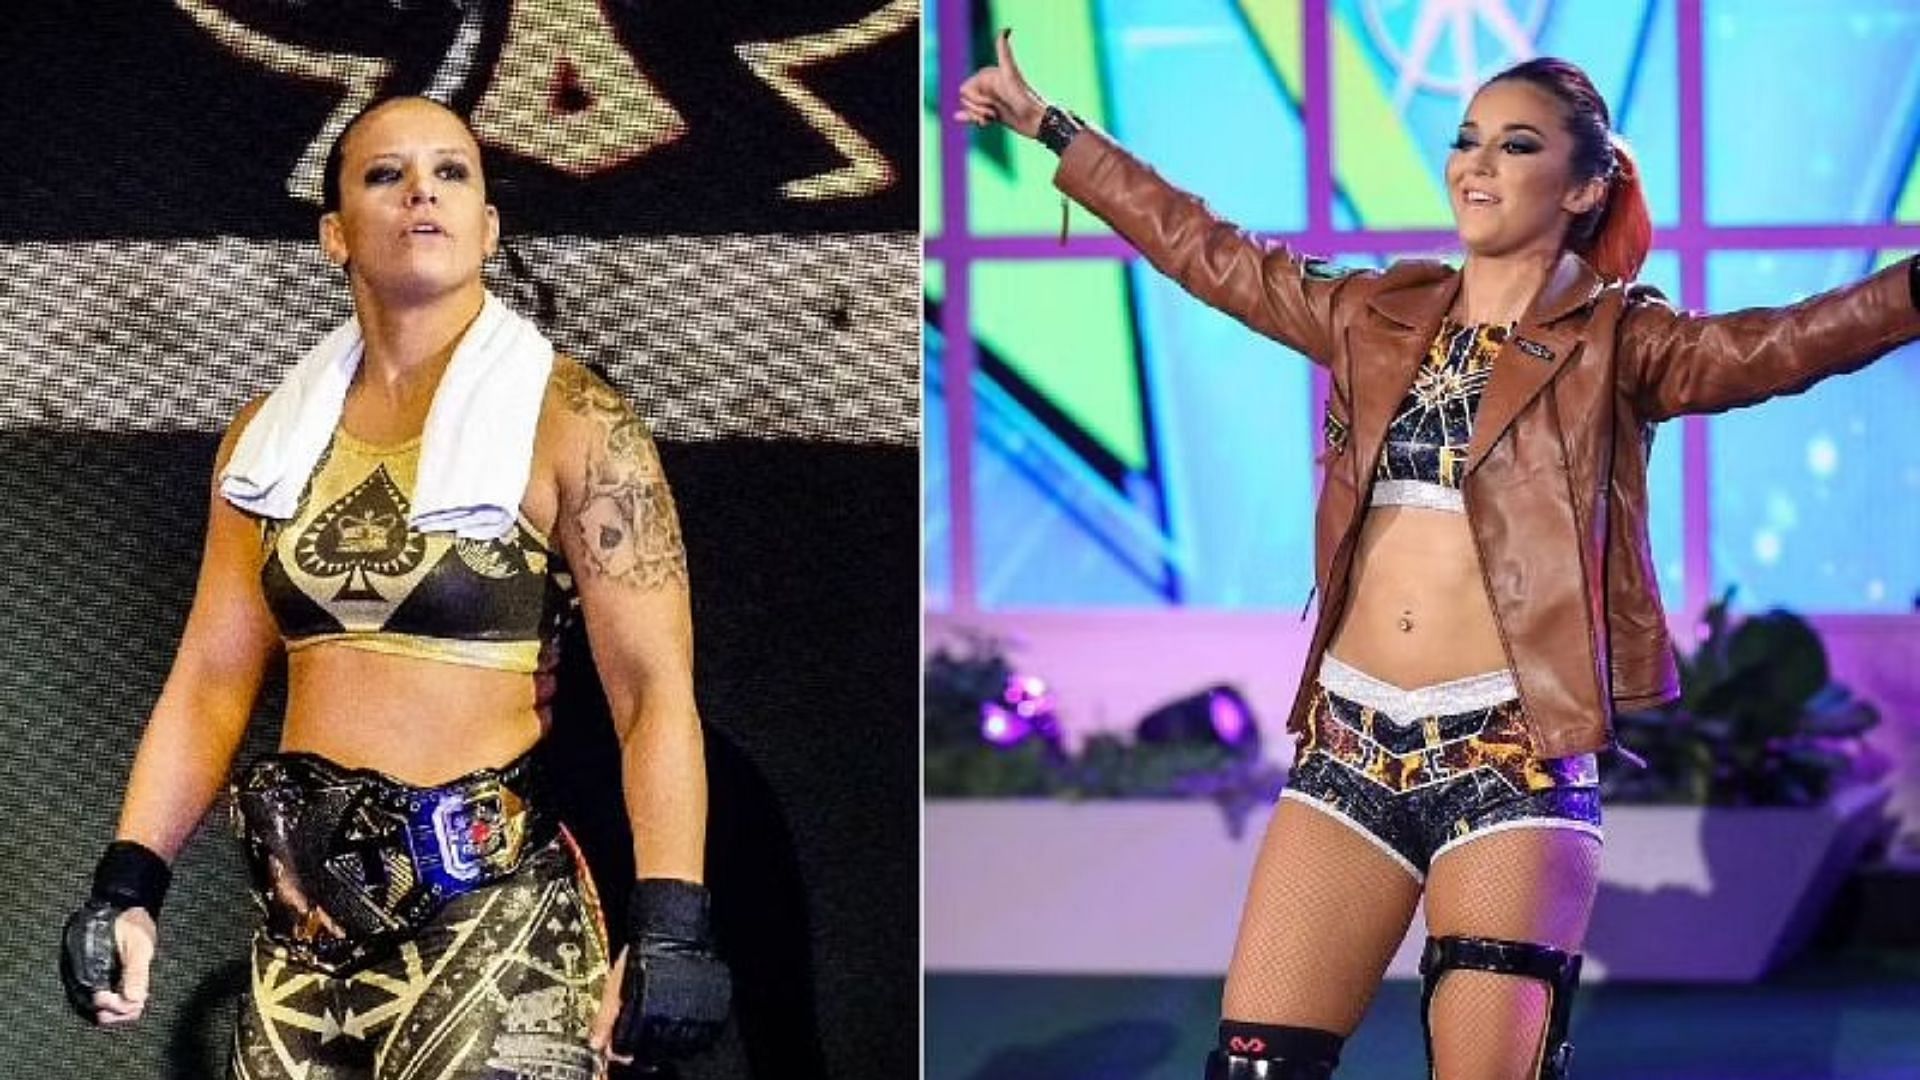 There are now a number of proud LGBTQ WWE superstars